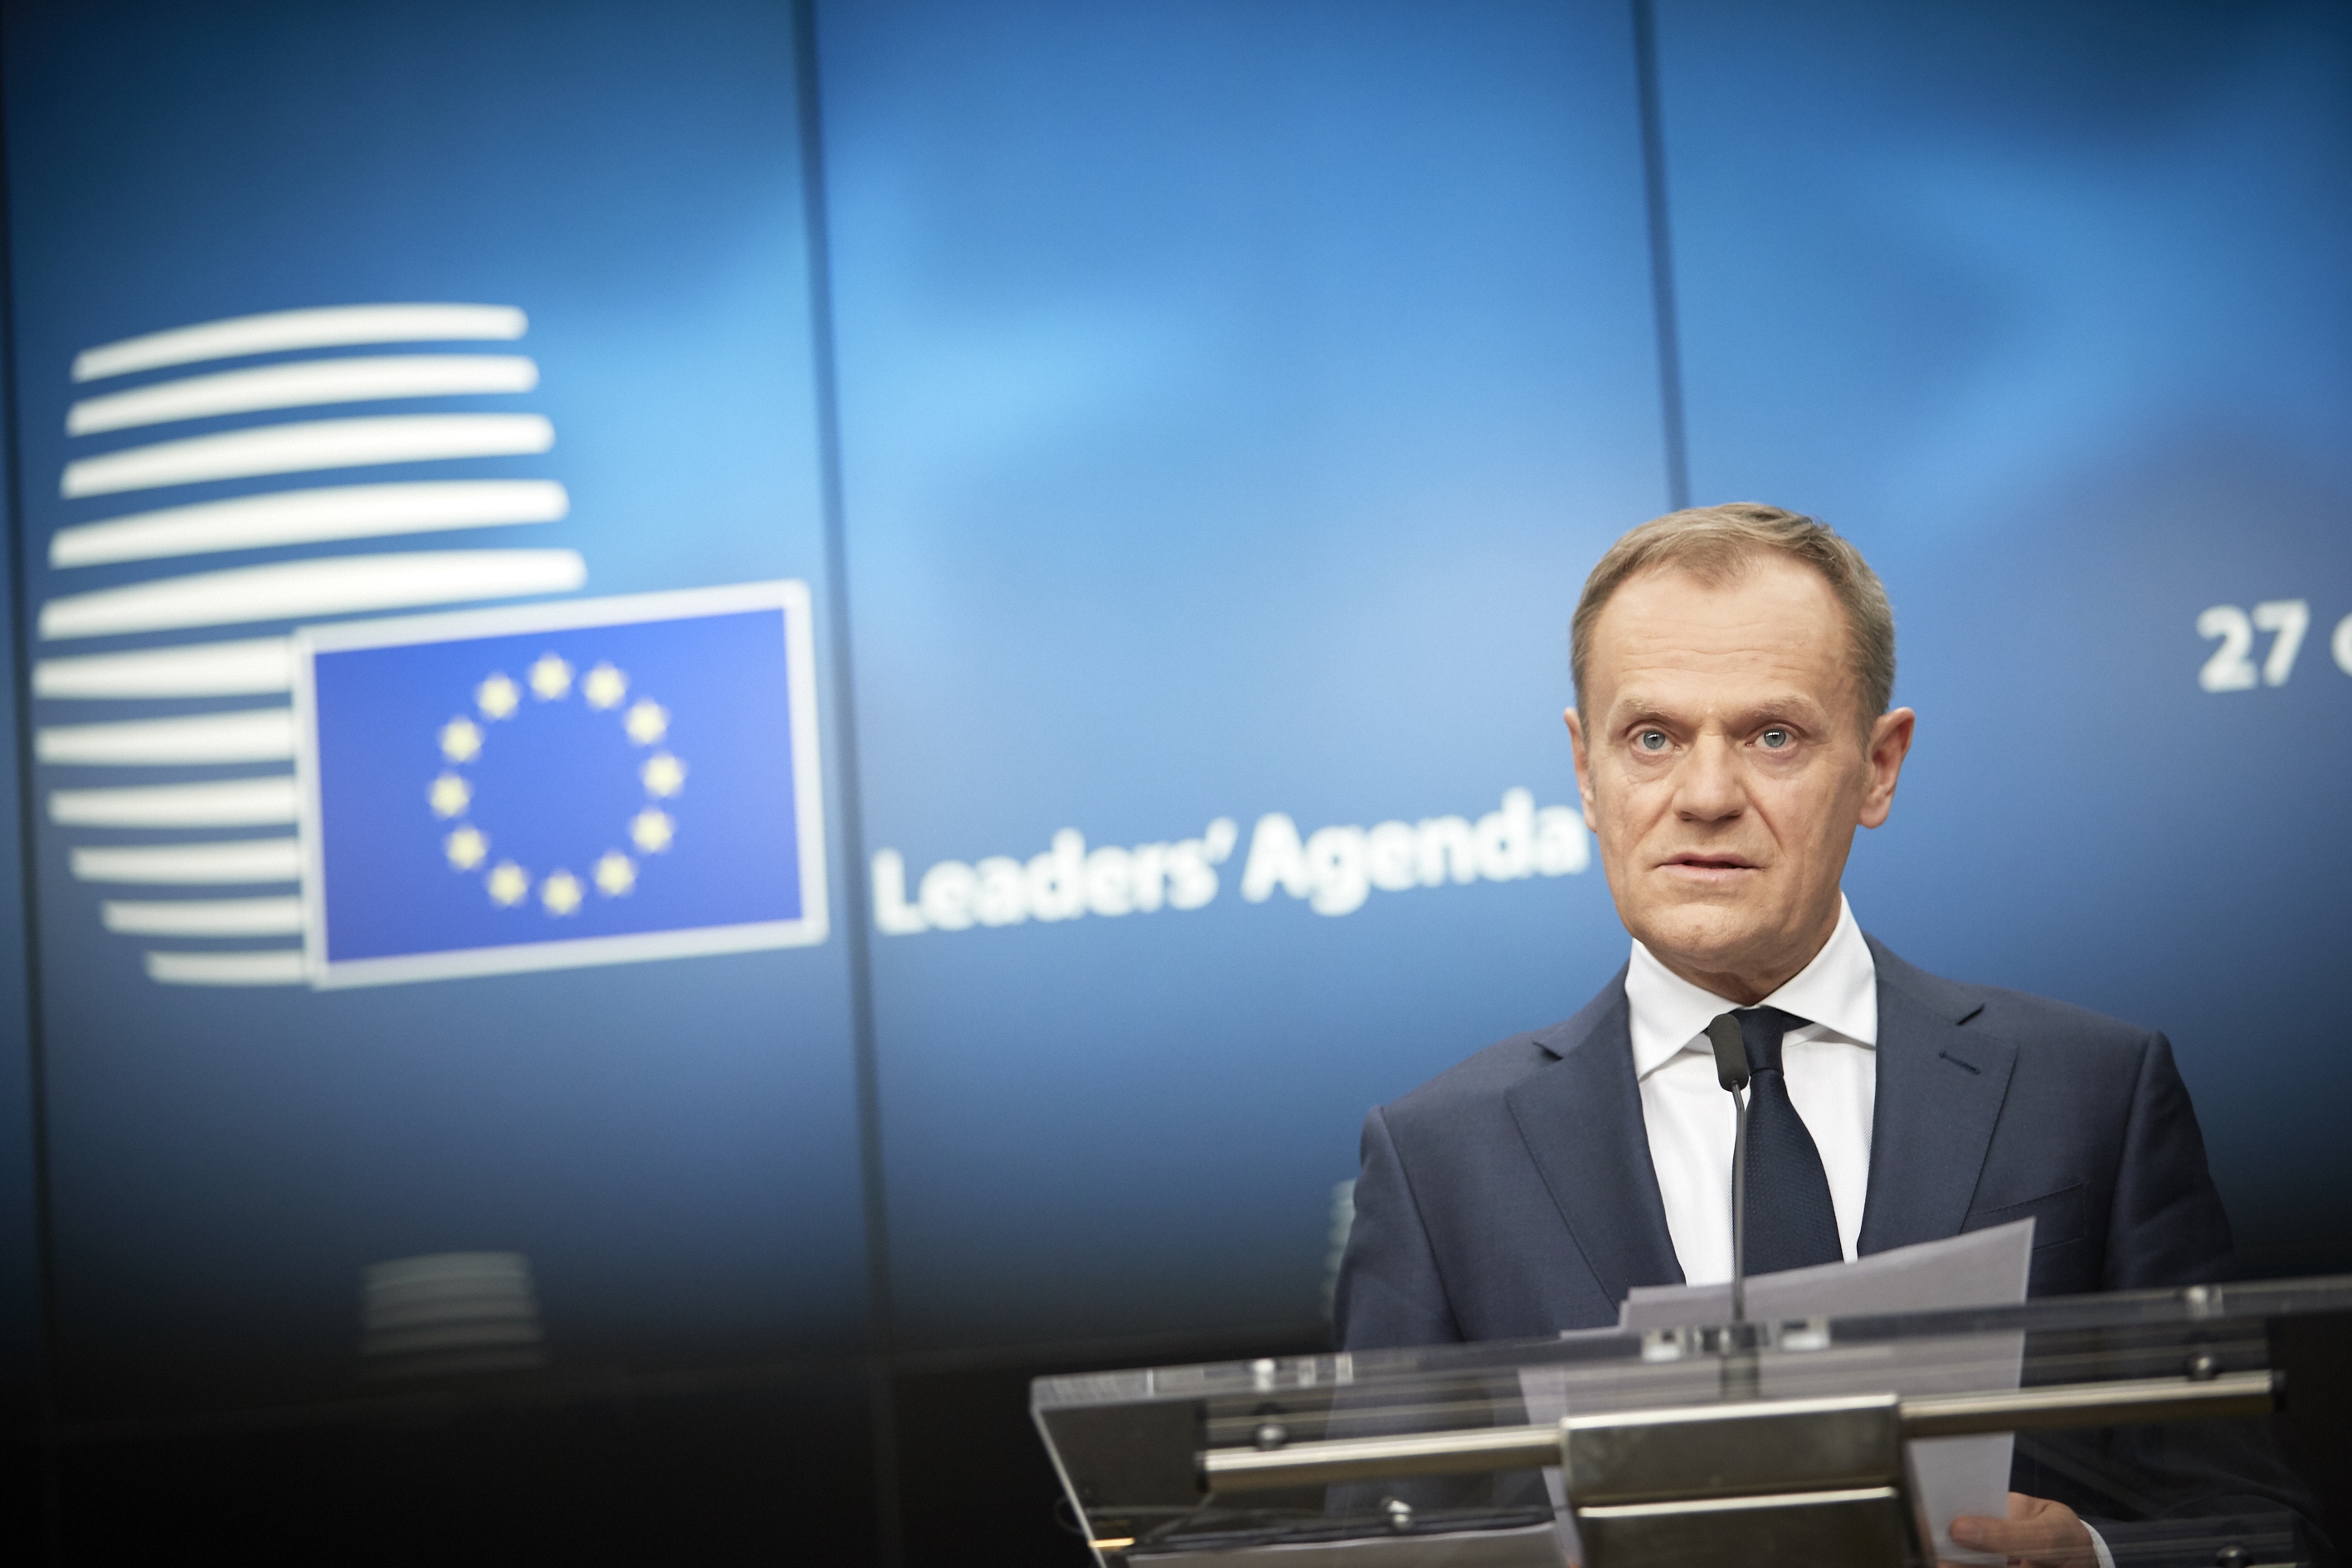 President of the European Council Donald Tusk speaking at the press conference